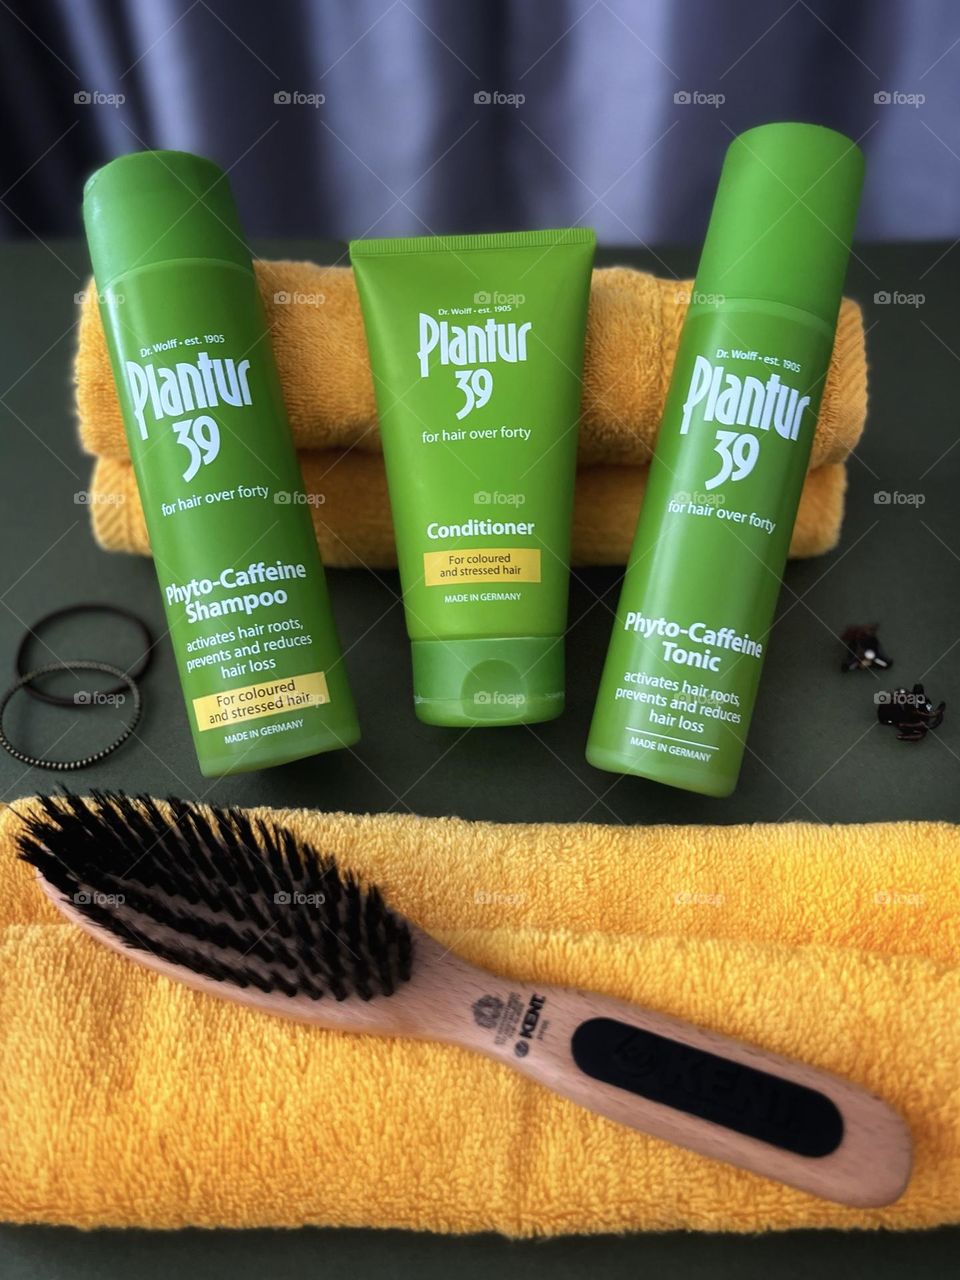 Great Plantur 39 set for hair over forty! Photo-Caffeine shampoo, conditioner and tonic. Activates hair roots, prevents and reduces hair loss. 